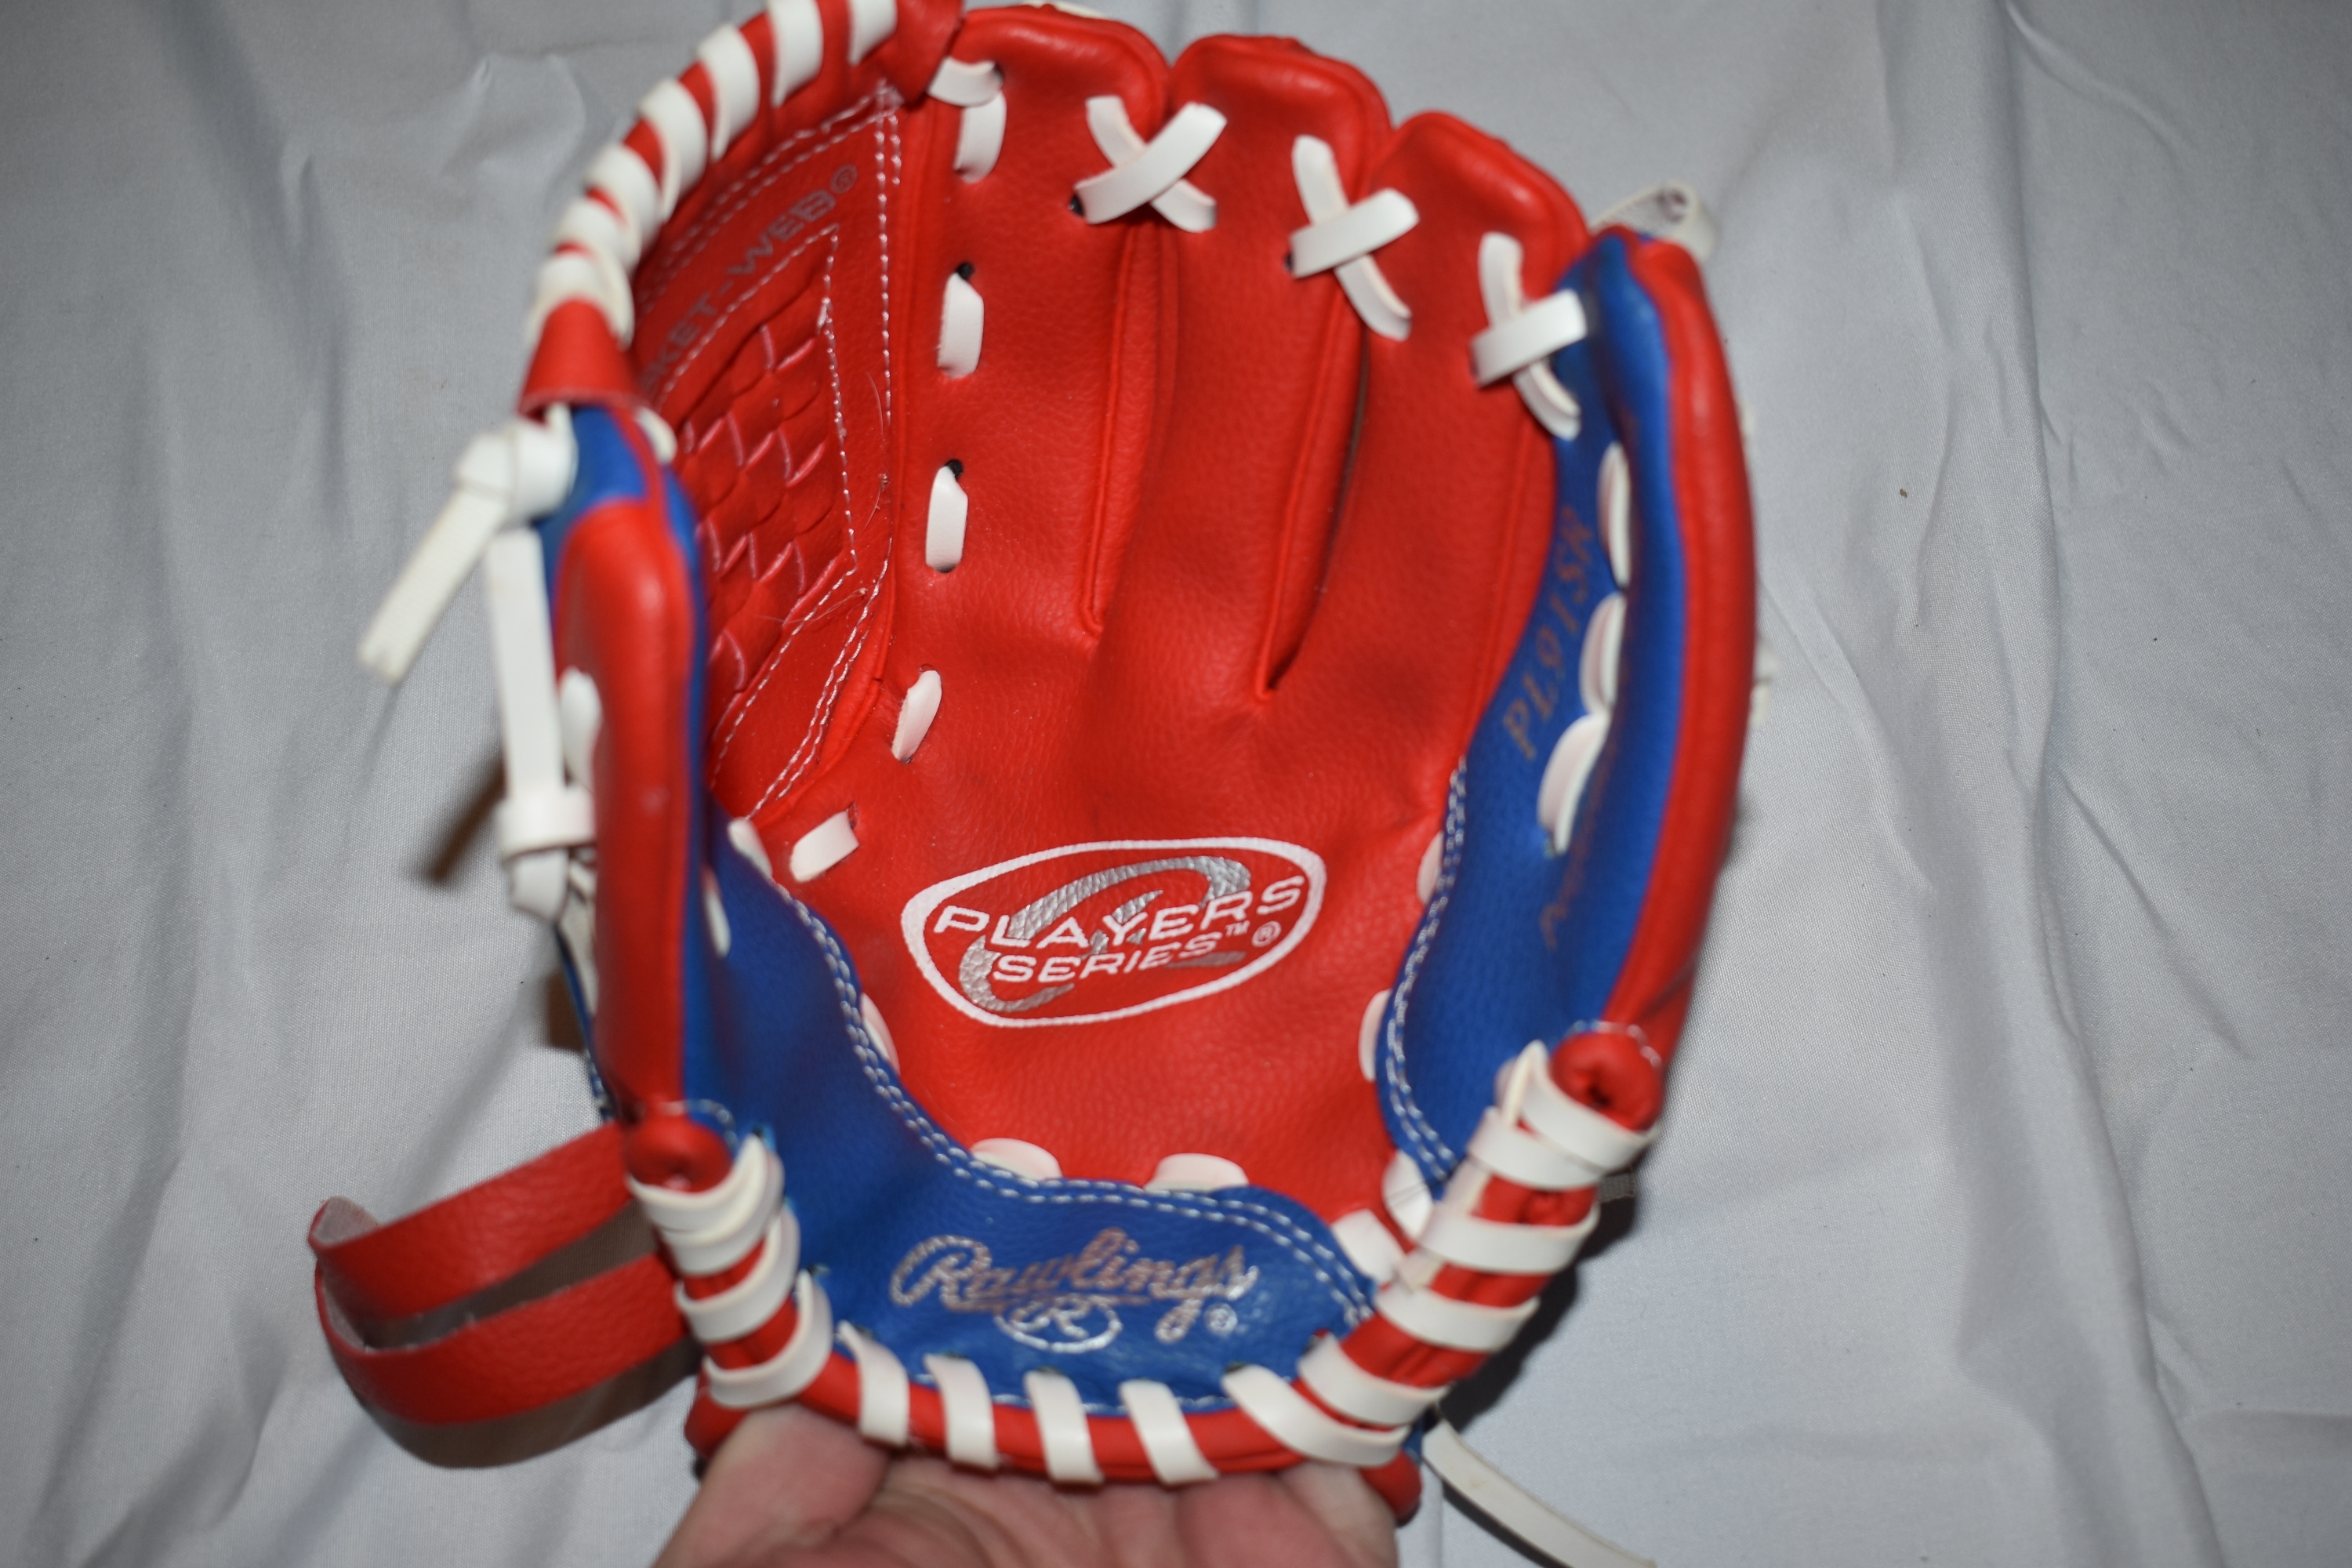 Rawlings Player Series Baseball Glove PL91SR, Red, 9 Inches - Great Condition!